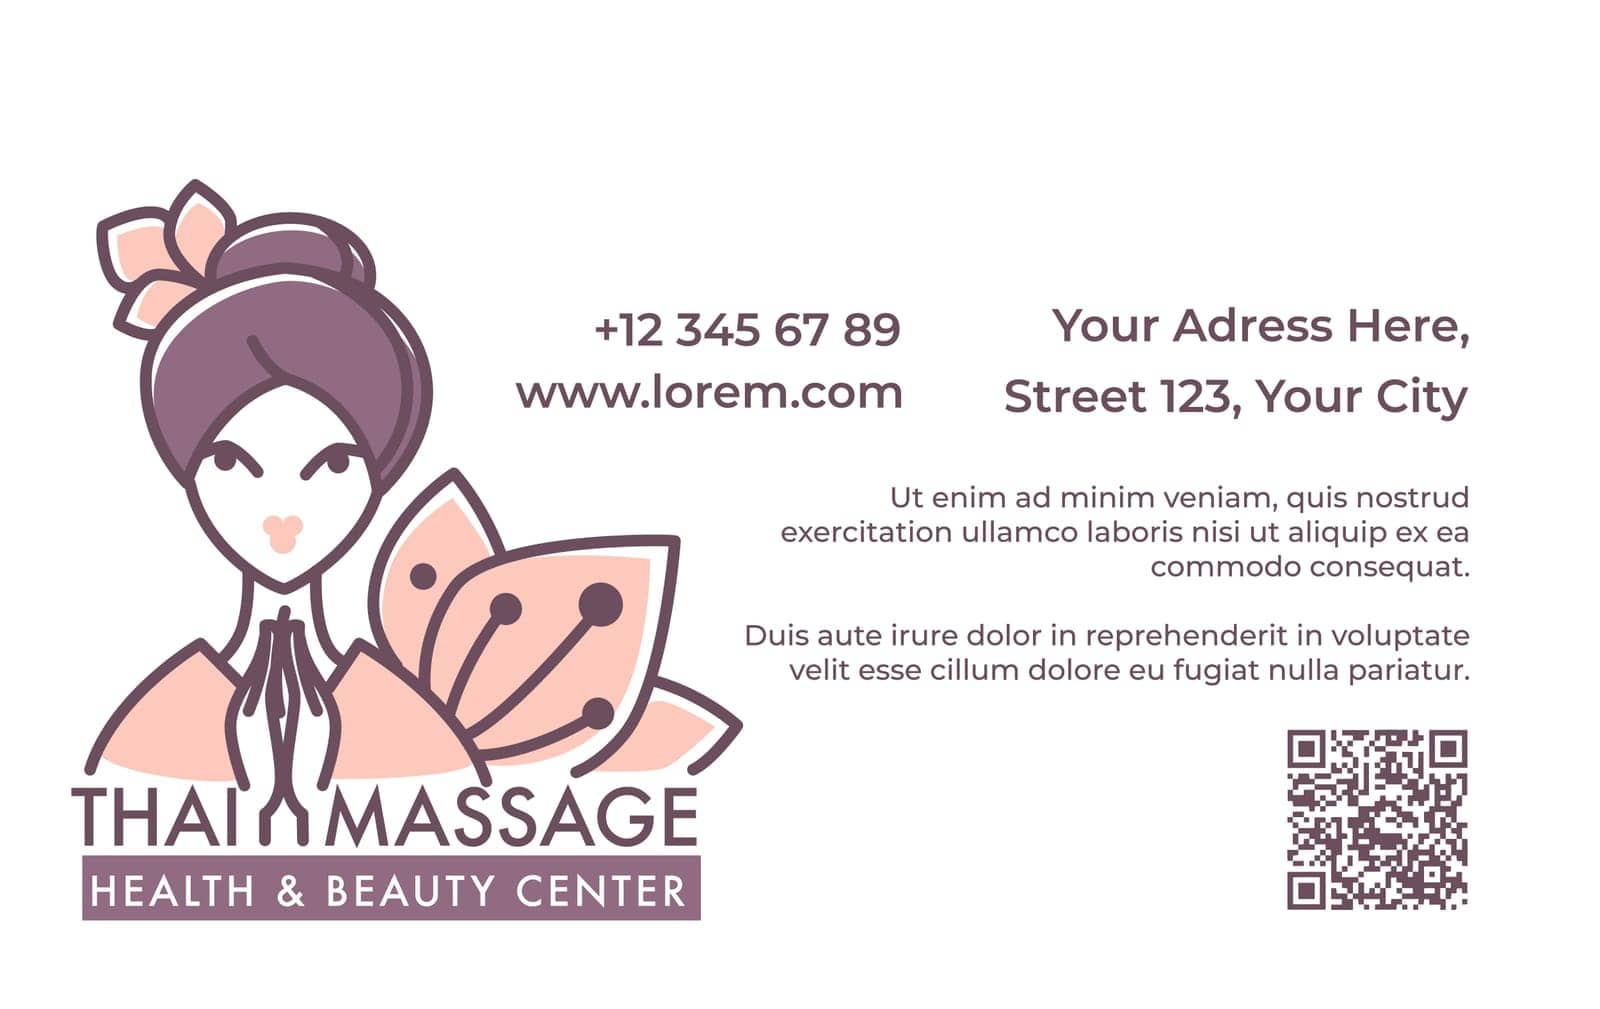 Thai massage, beauty and health center, cards by Sonulkaster